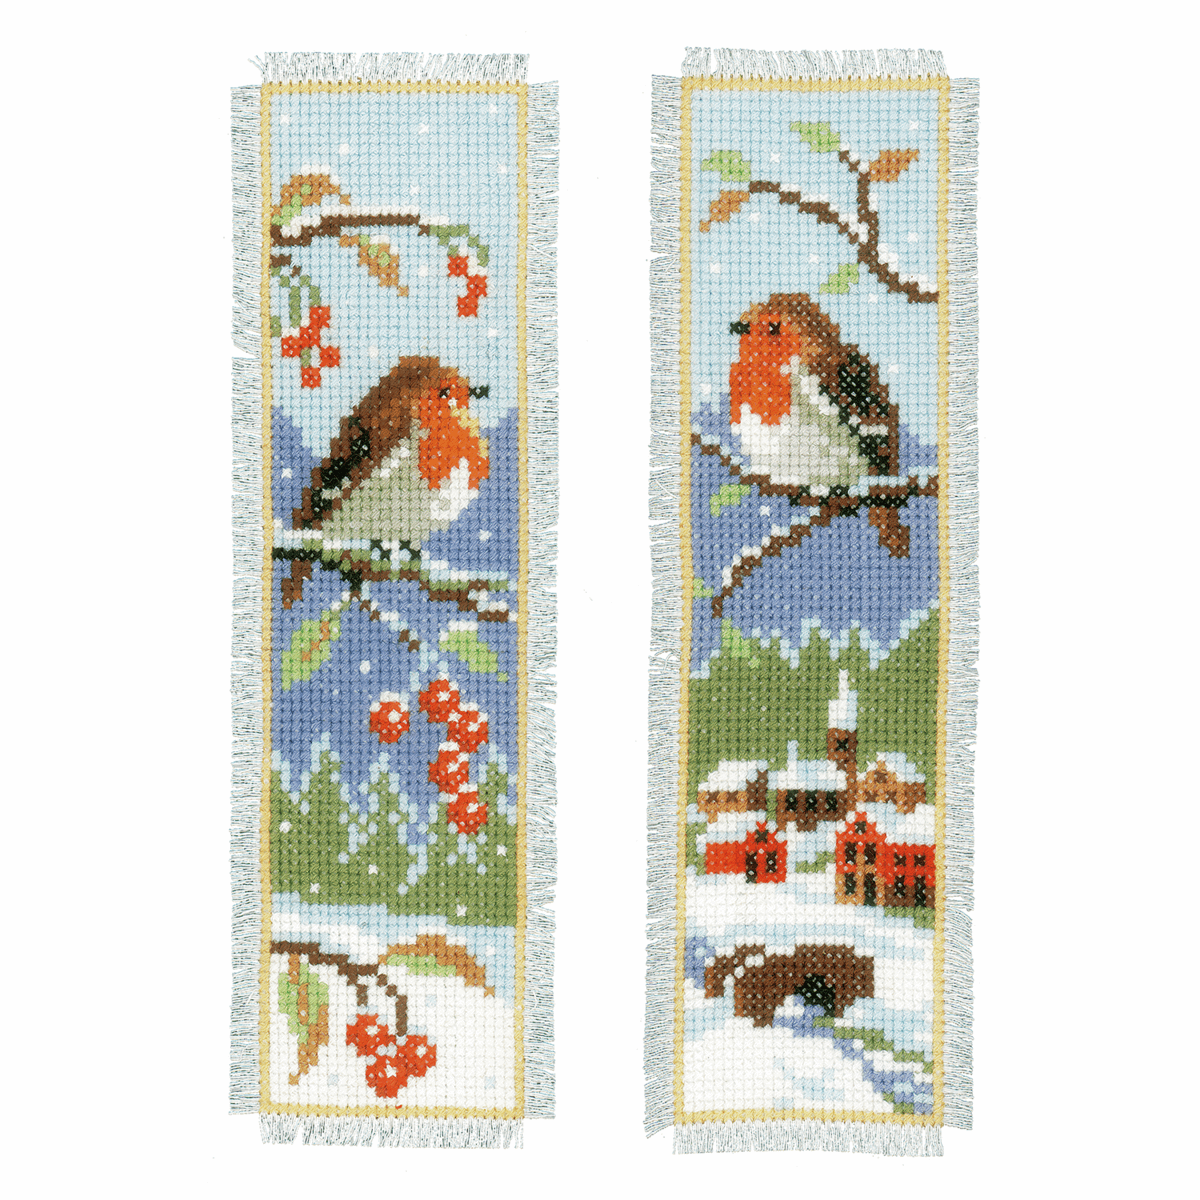 Berries Bookmark Counted Cross Stitch Pattern – The Art of Cross Stitch